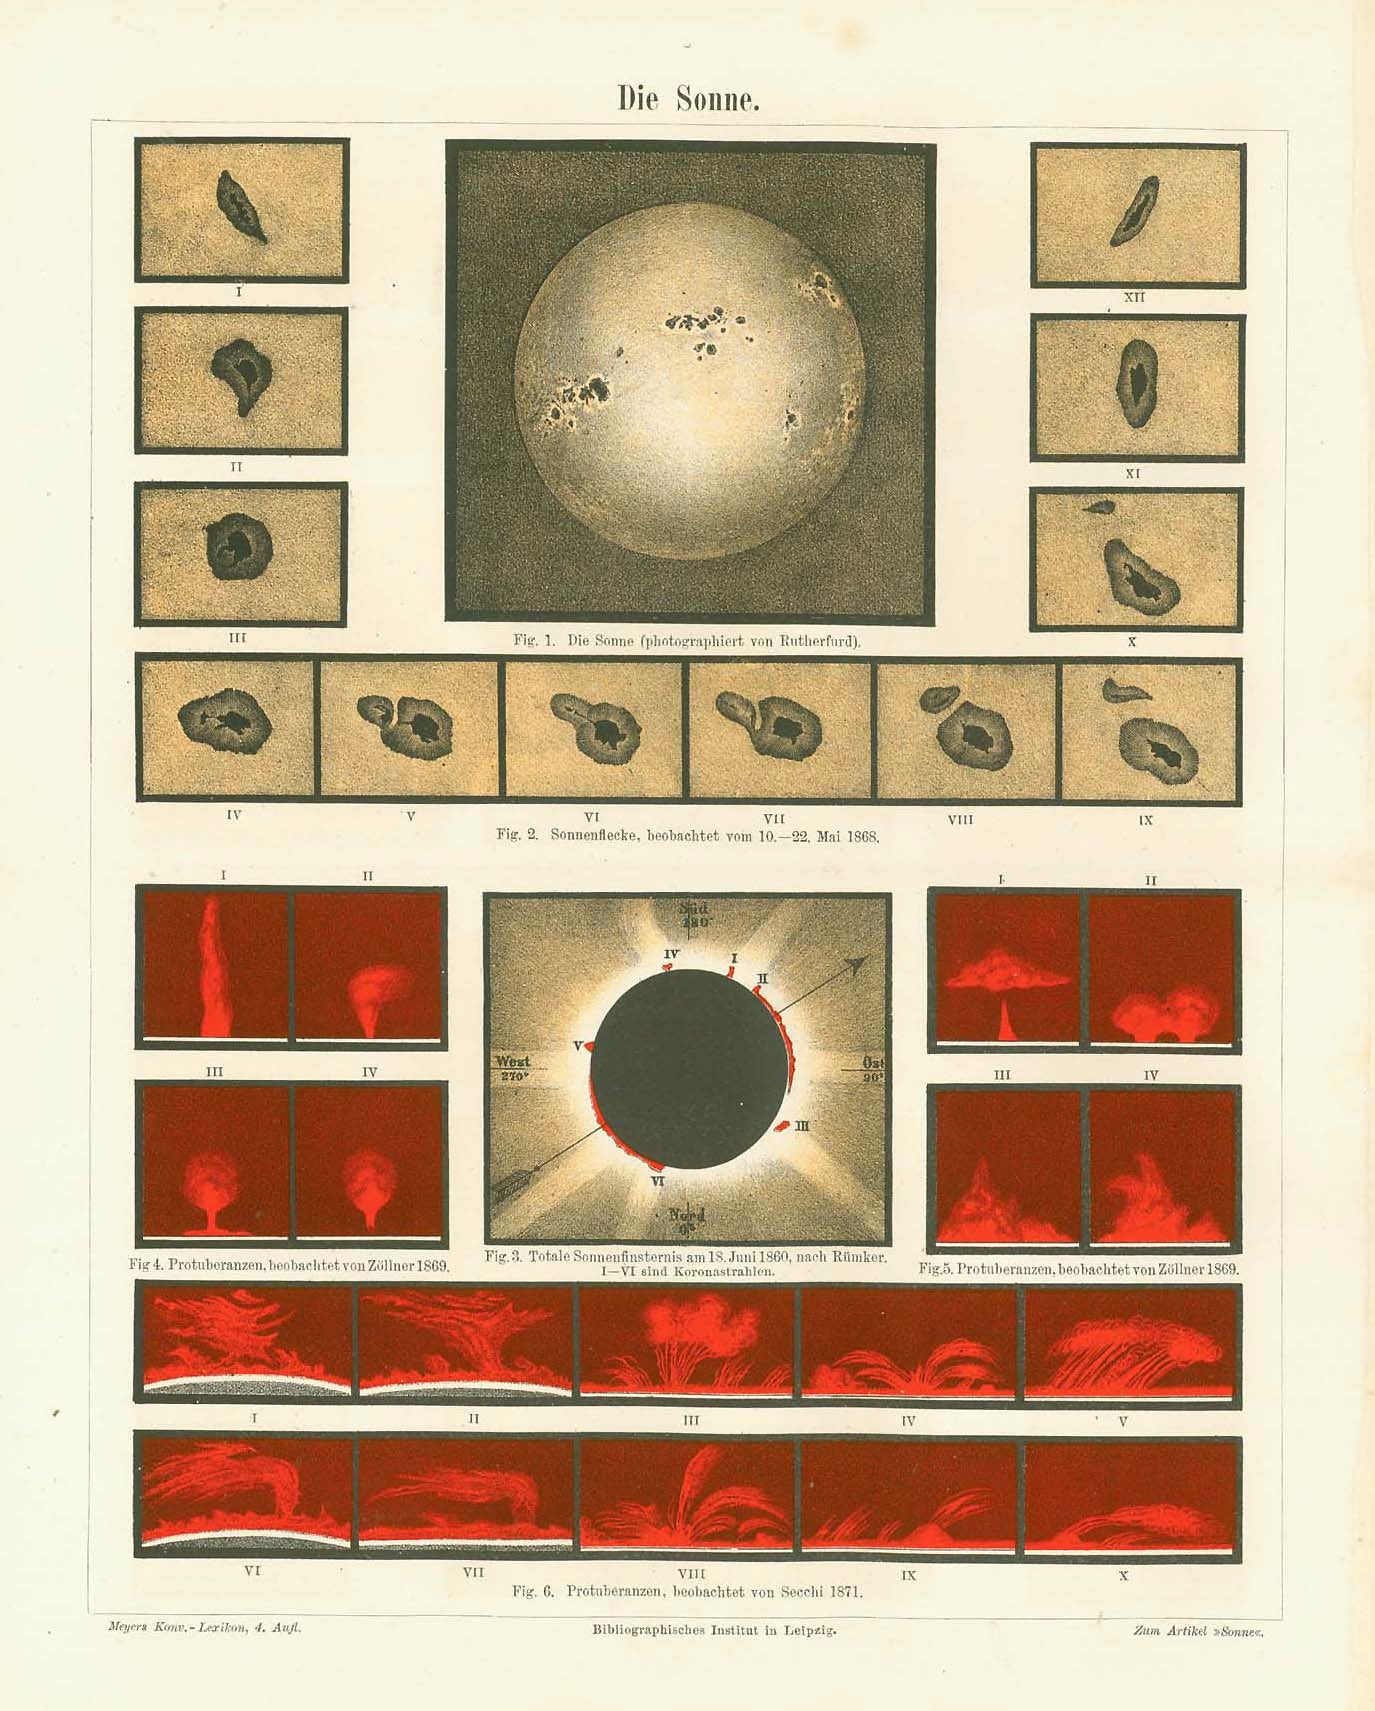 astromnomy, "Die Sonne" (The sun)  Chromolithograph after a photograph of the sun by Rutherford.  Sonnenflecke observed May 10 - 22, 1868  Total solar eclipse June 18, 1860  Protuberances observed by Secchi 1871  Published in Leipzig, 1893  Original antique print 